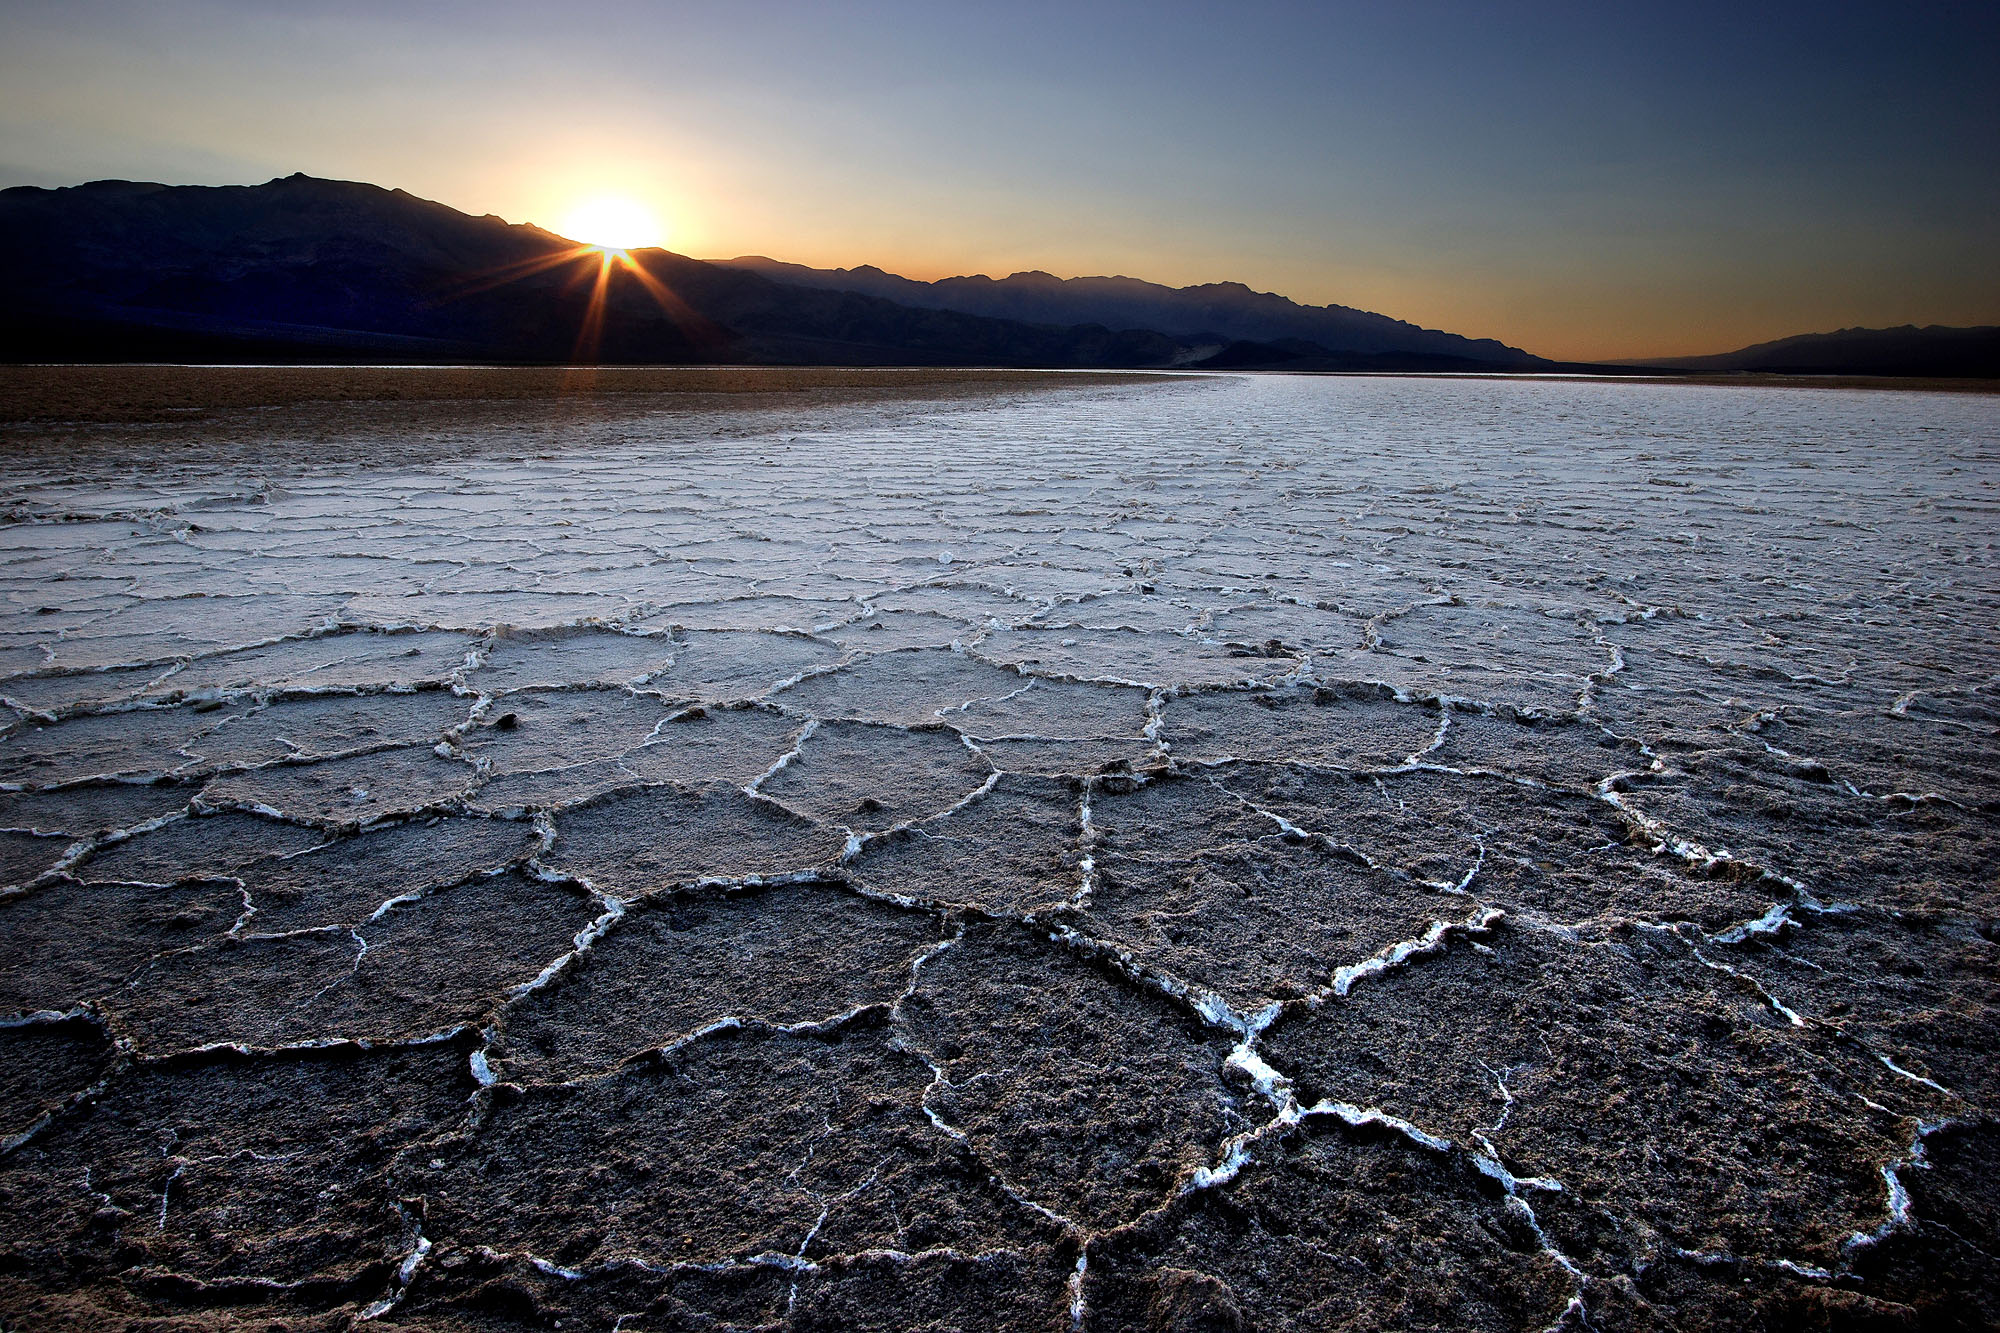 The Badwater Basin in Death Valley is a hot dried up salt lake full of mud cracks located below sea-level